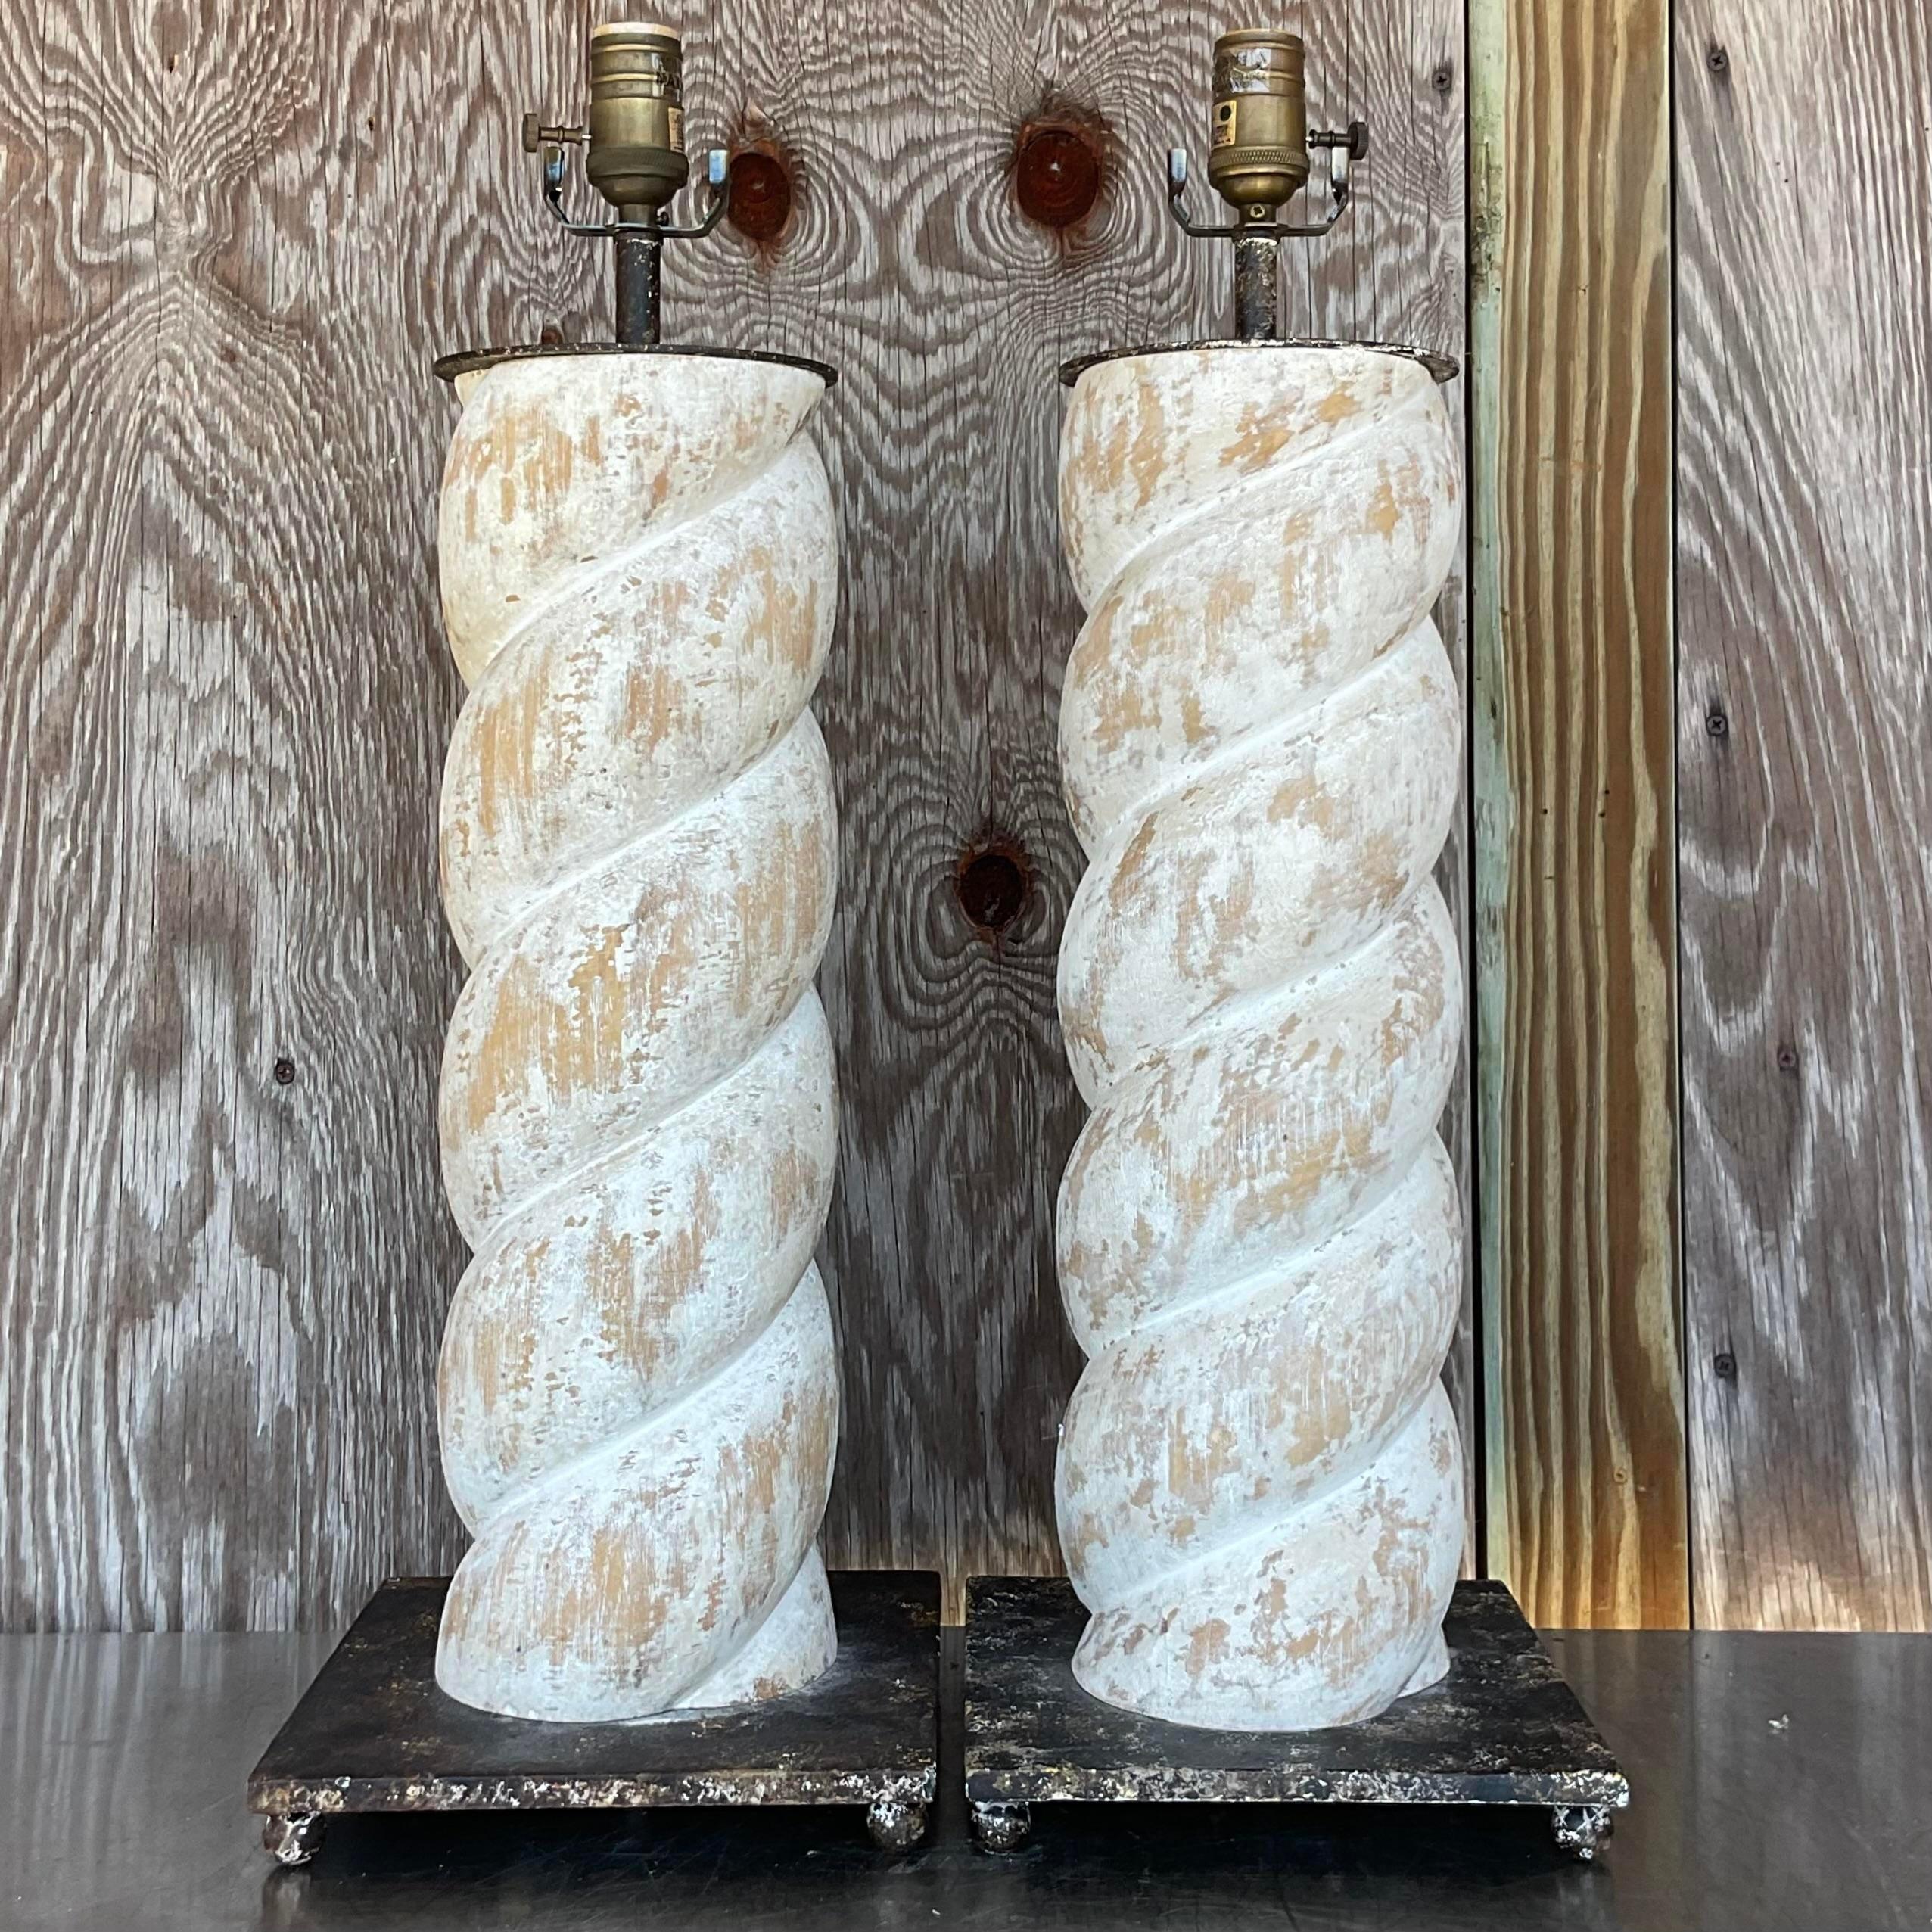 A stunning pair of vintage Boho table lamps. A chic twisted column design in wood with a whitewashed finish. Hand painted plinth and cap. Acquired from a Hobe Sound estate.